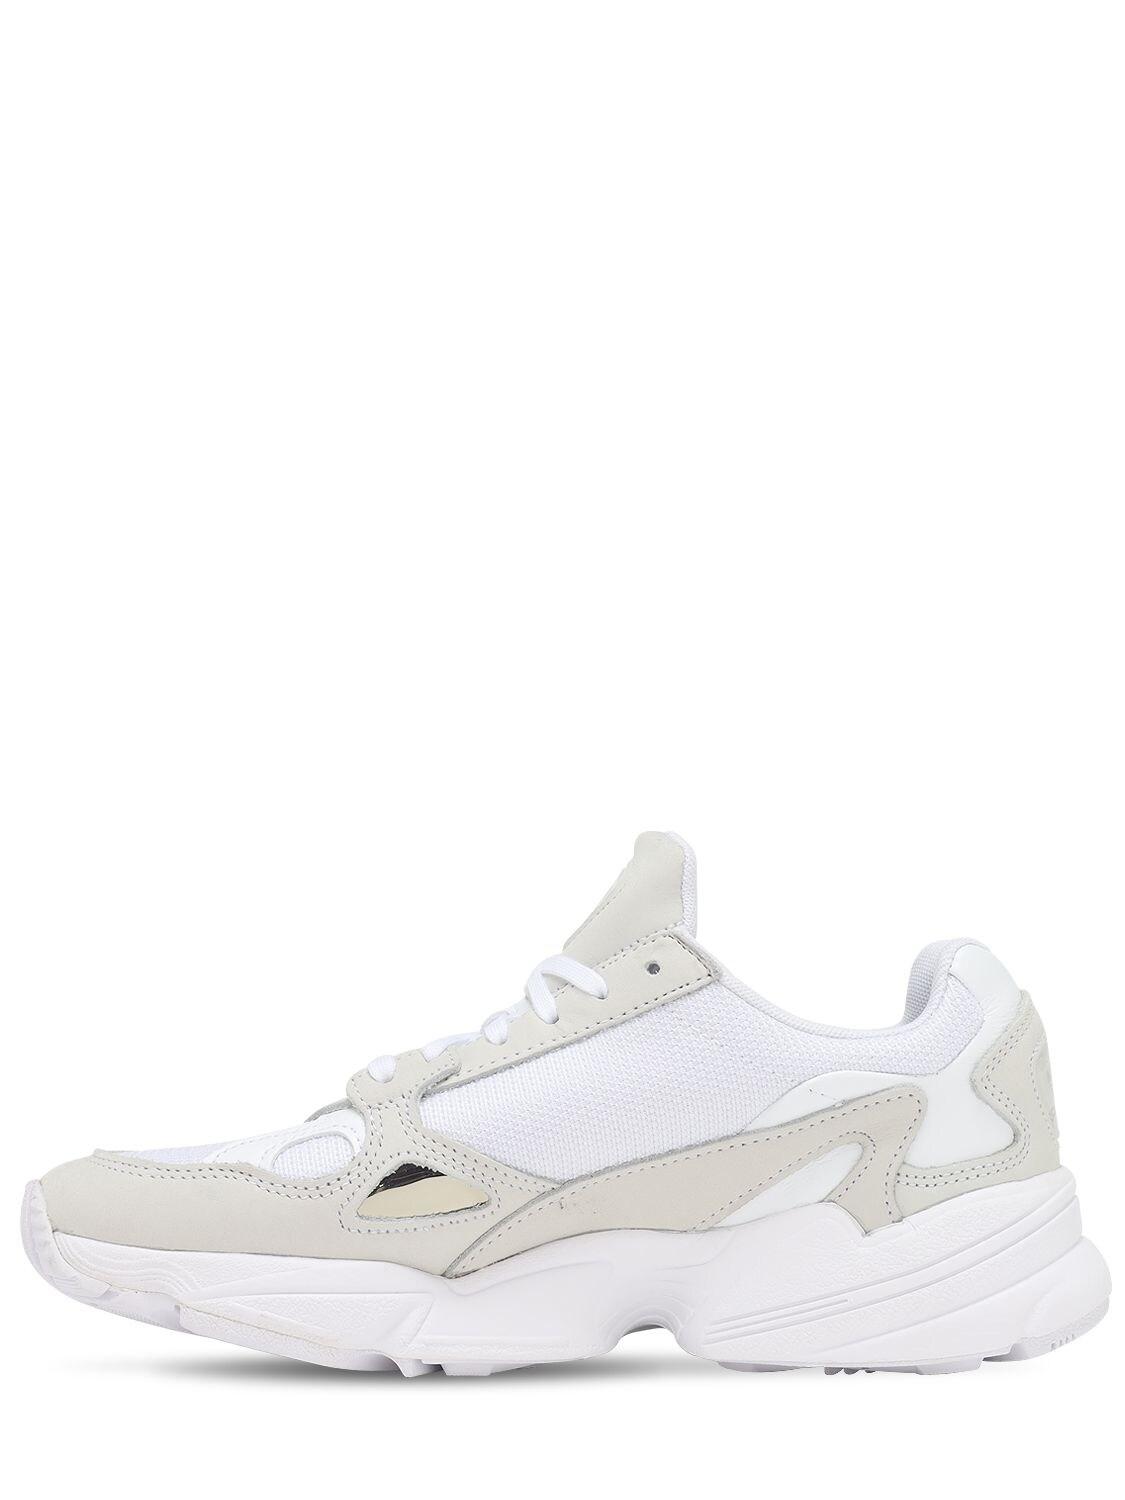 adidas Originals Suede Falcon in White/White/Crystal White (White) - Save  40% - Lyst